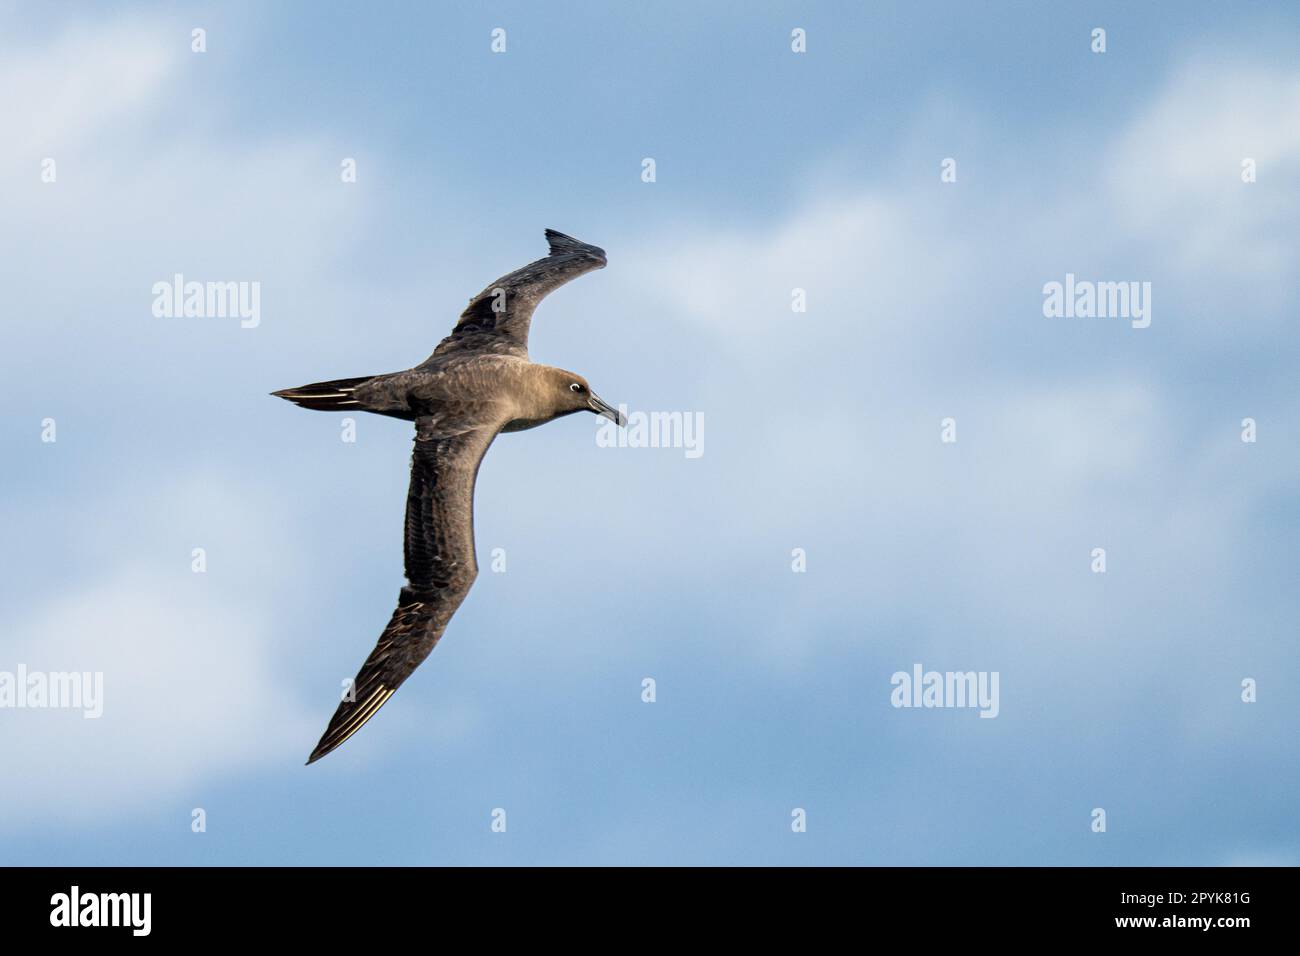 Dark albatross (Phoebetria fusca) a sooty black albatross with characteristically long, narrow wings and a narrowly tapering tail glides elegantly through the air in soaring flight Stock Photo